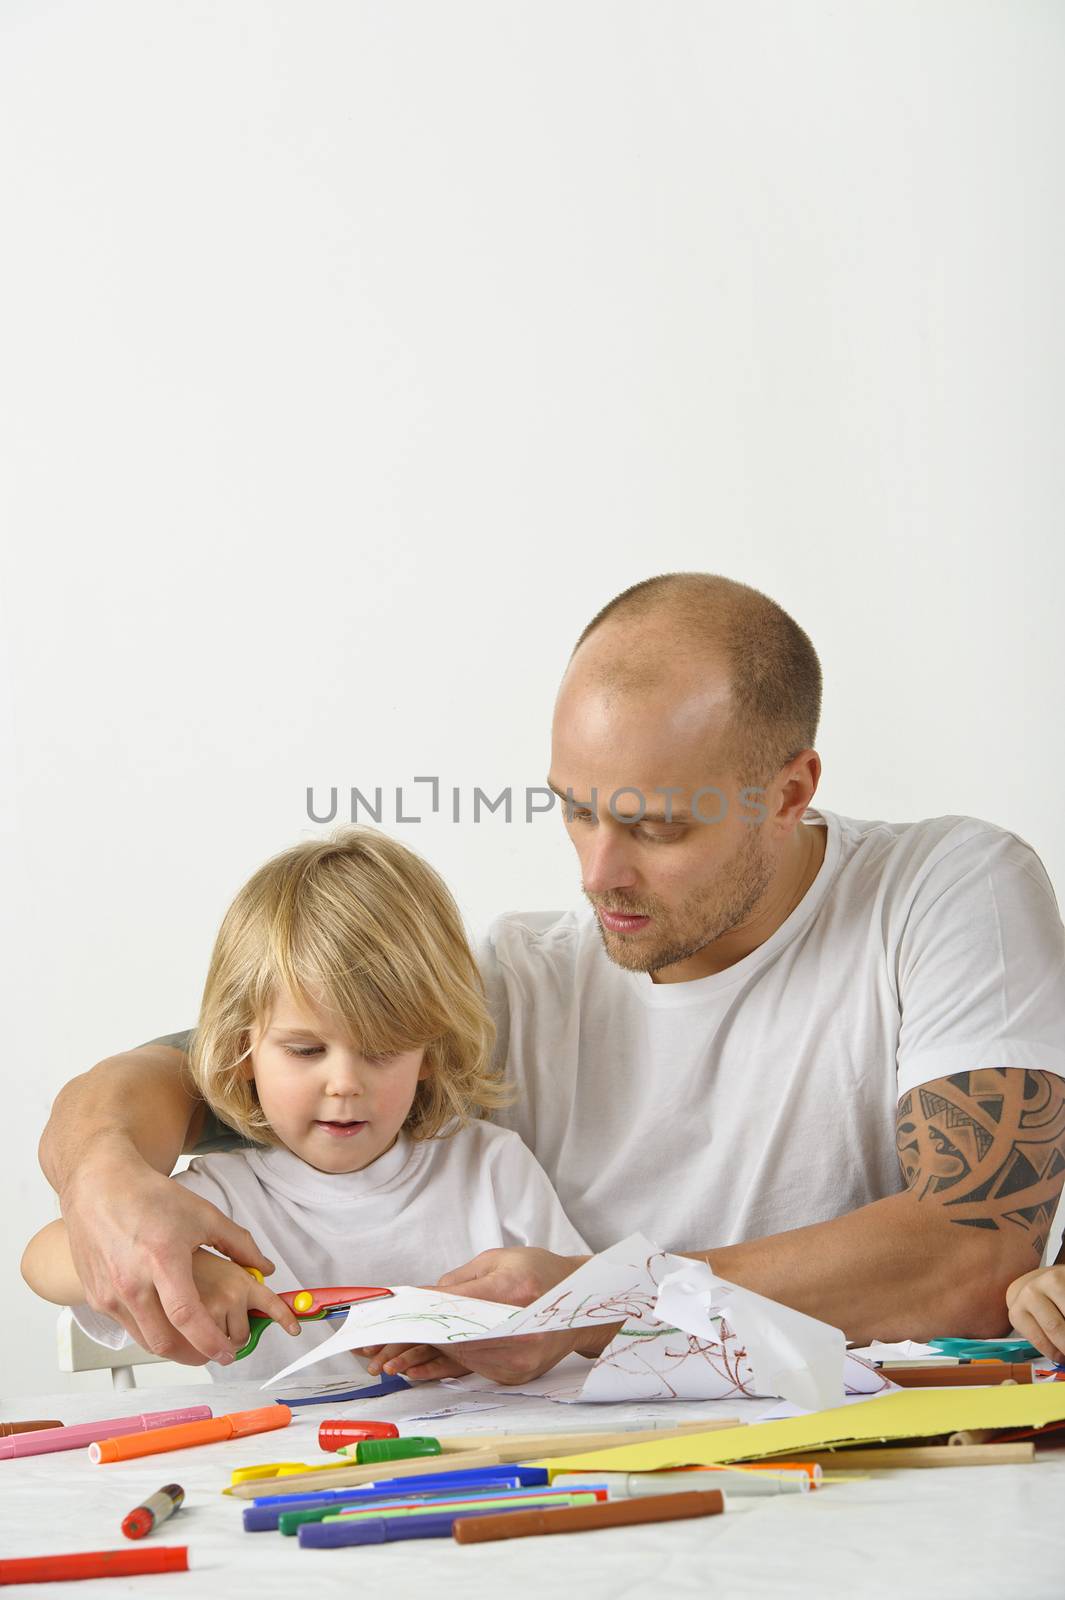 Father teaches his young son how to use a scissors. The father's upper arms are tattoed.